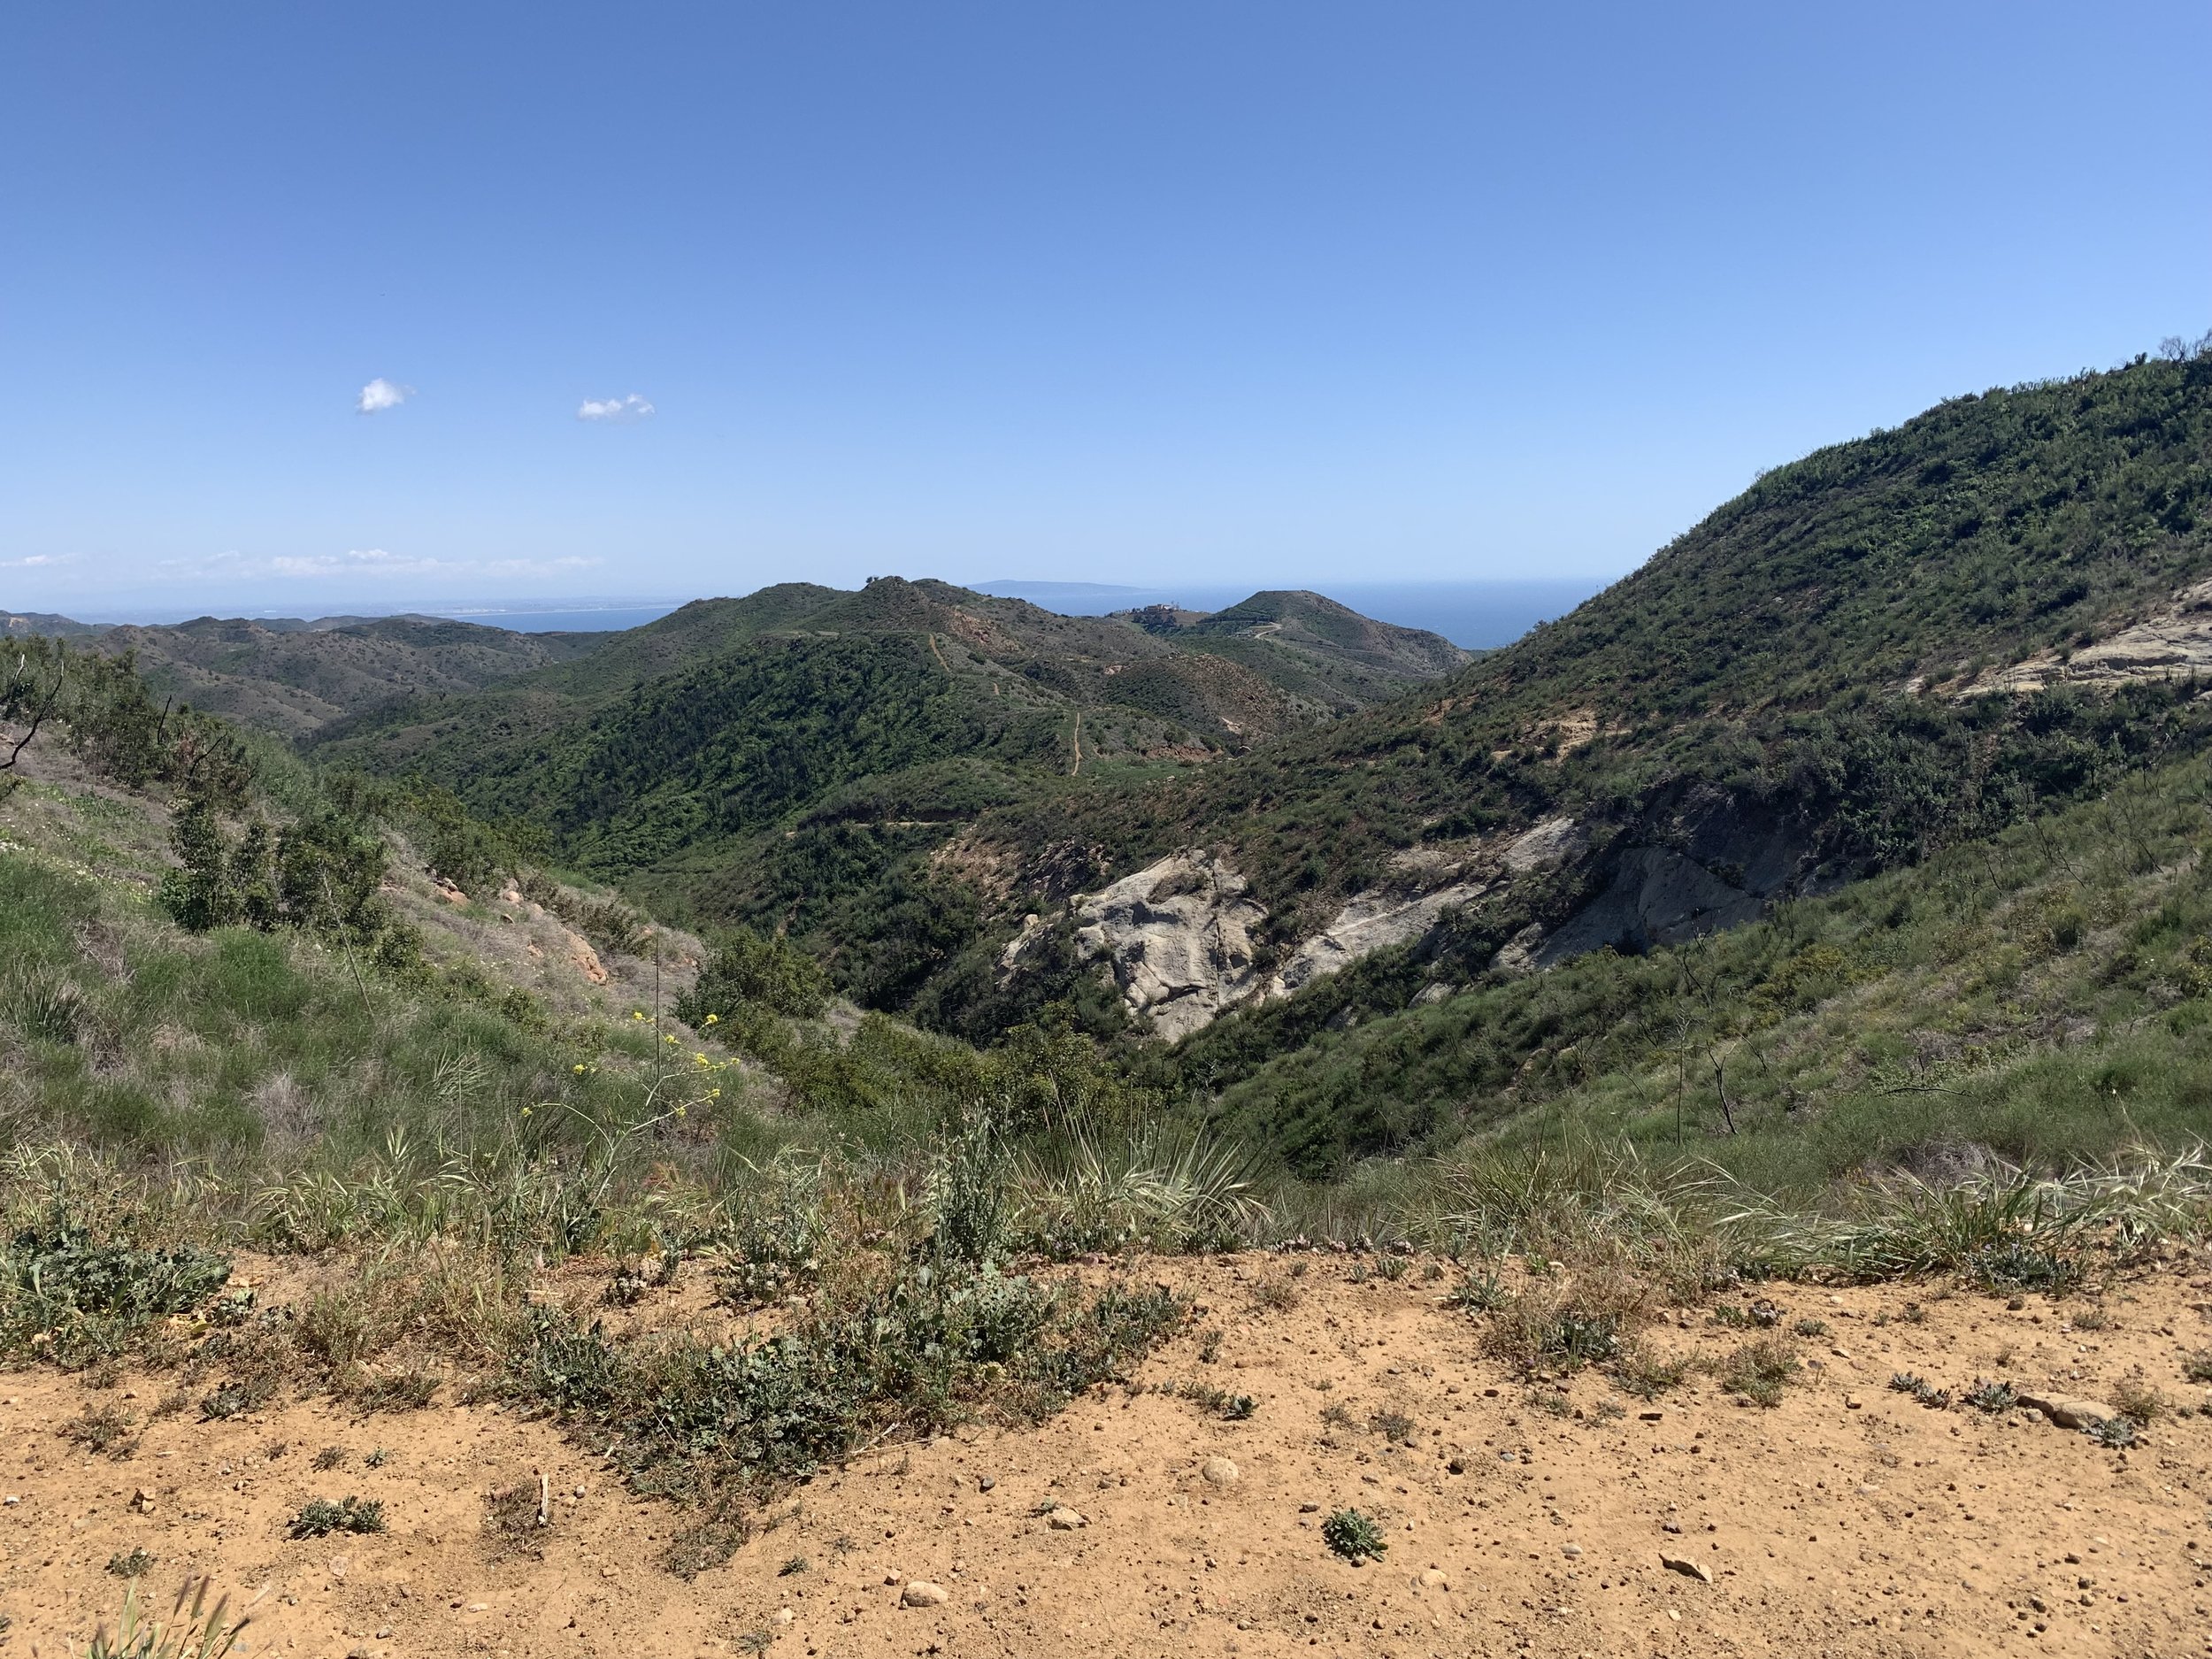 Looking into Solstice Canyon